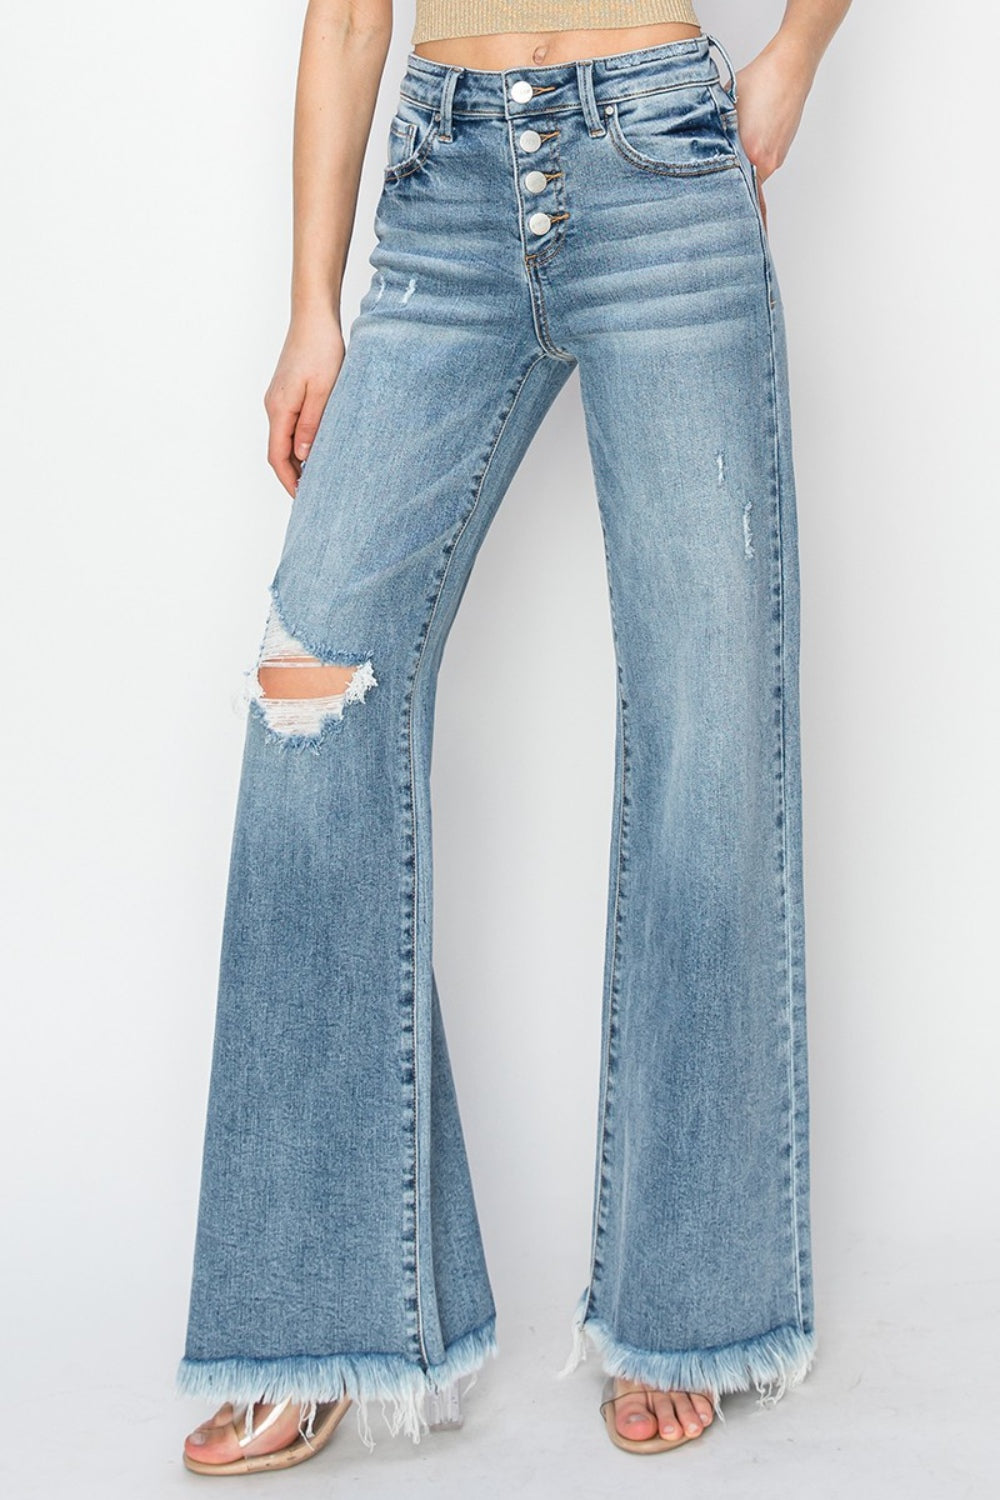 ❤GYPSY-RISEN-Mid Rise Button Fly Wide Leg Jeans